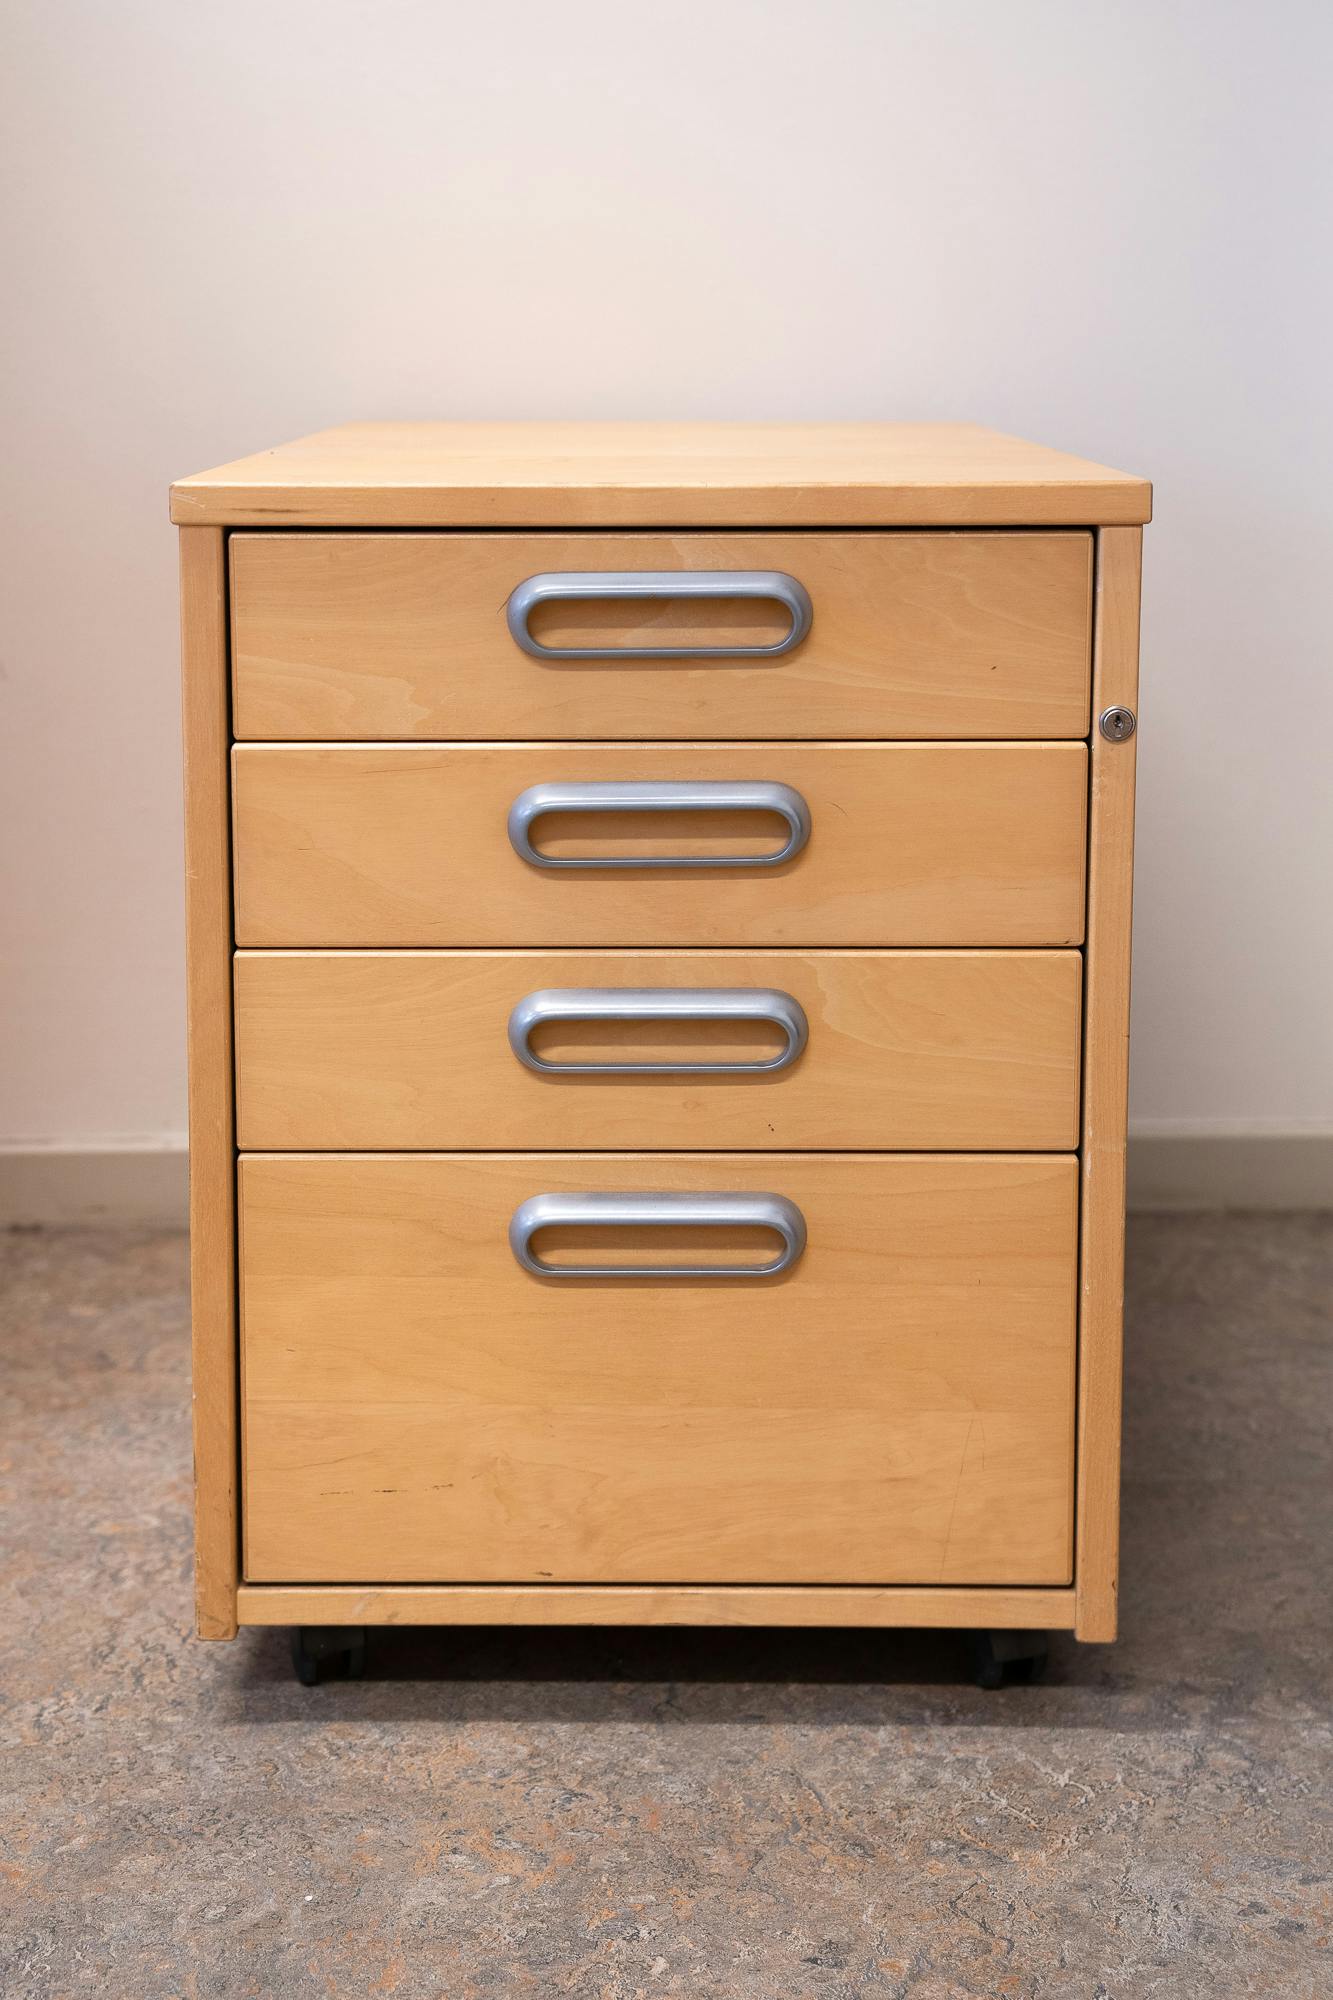 wooden pedestal with four drawers - Second hand quality "Storage" - Relieve Furniture